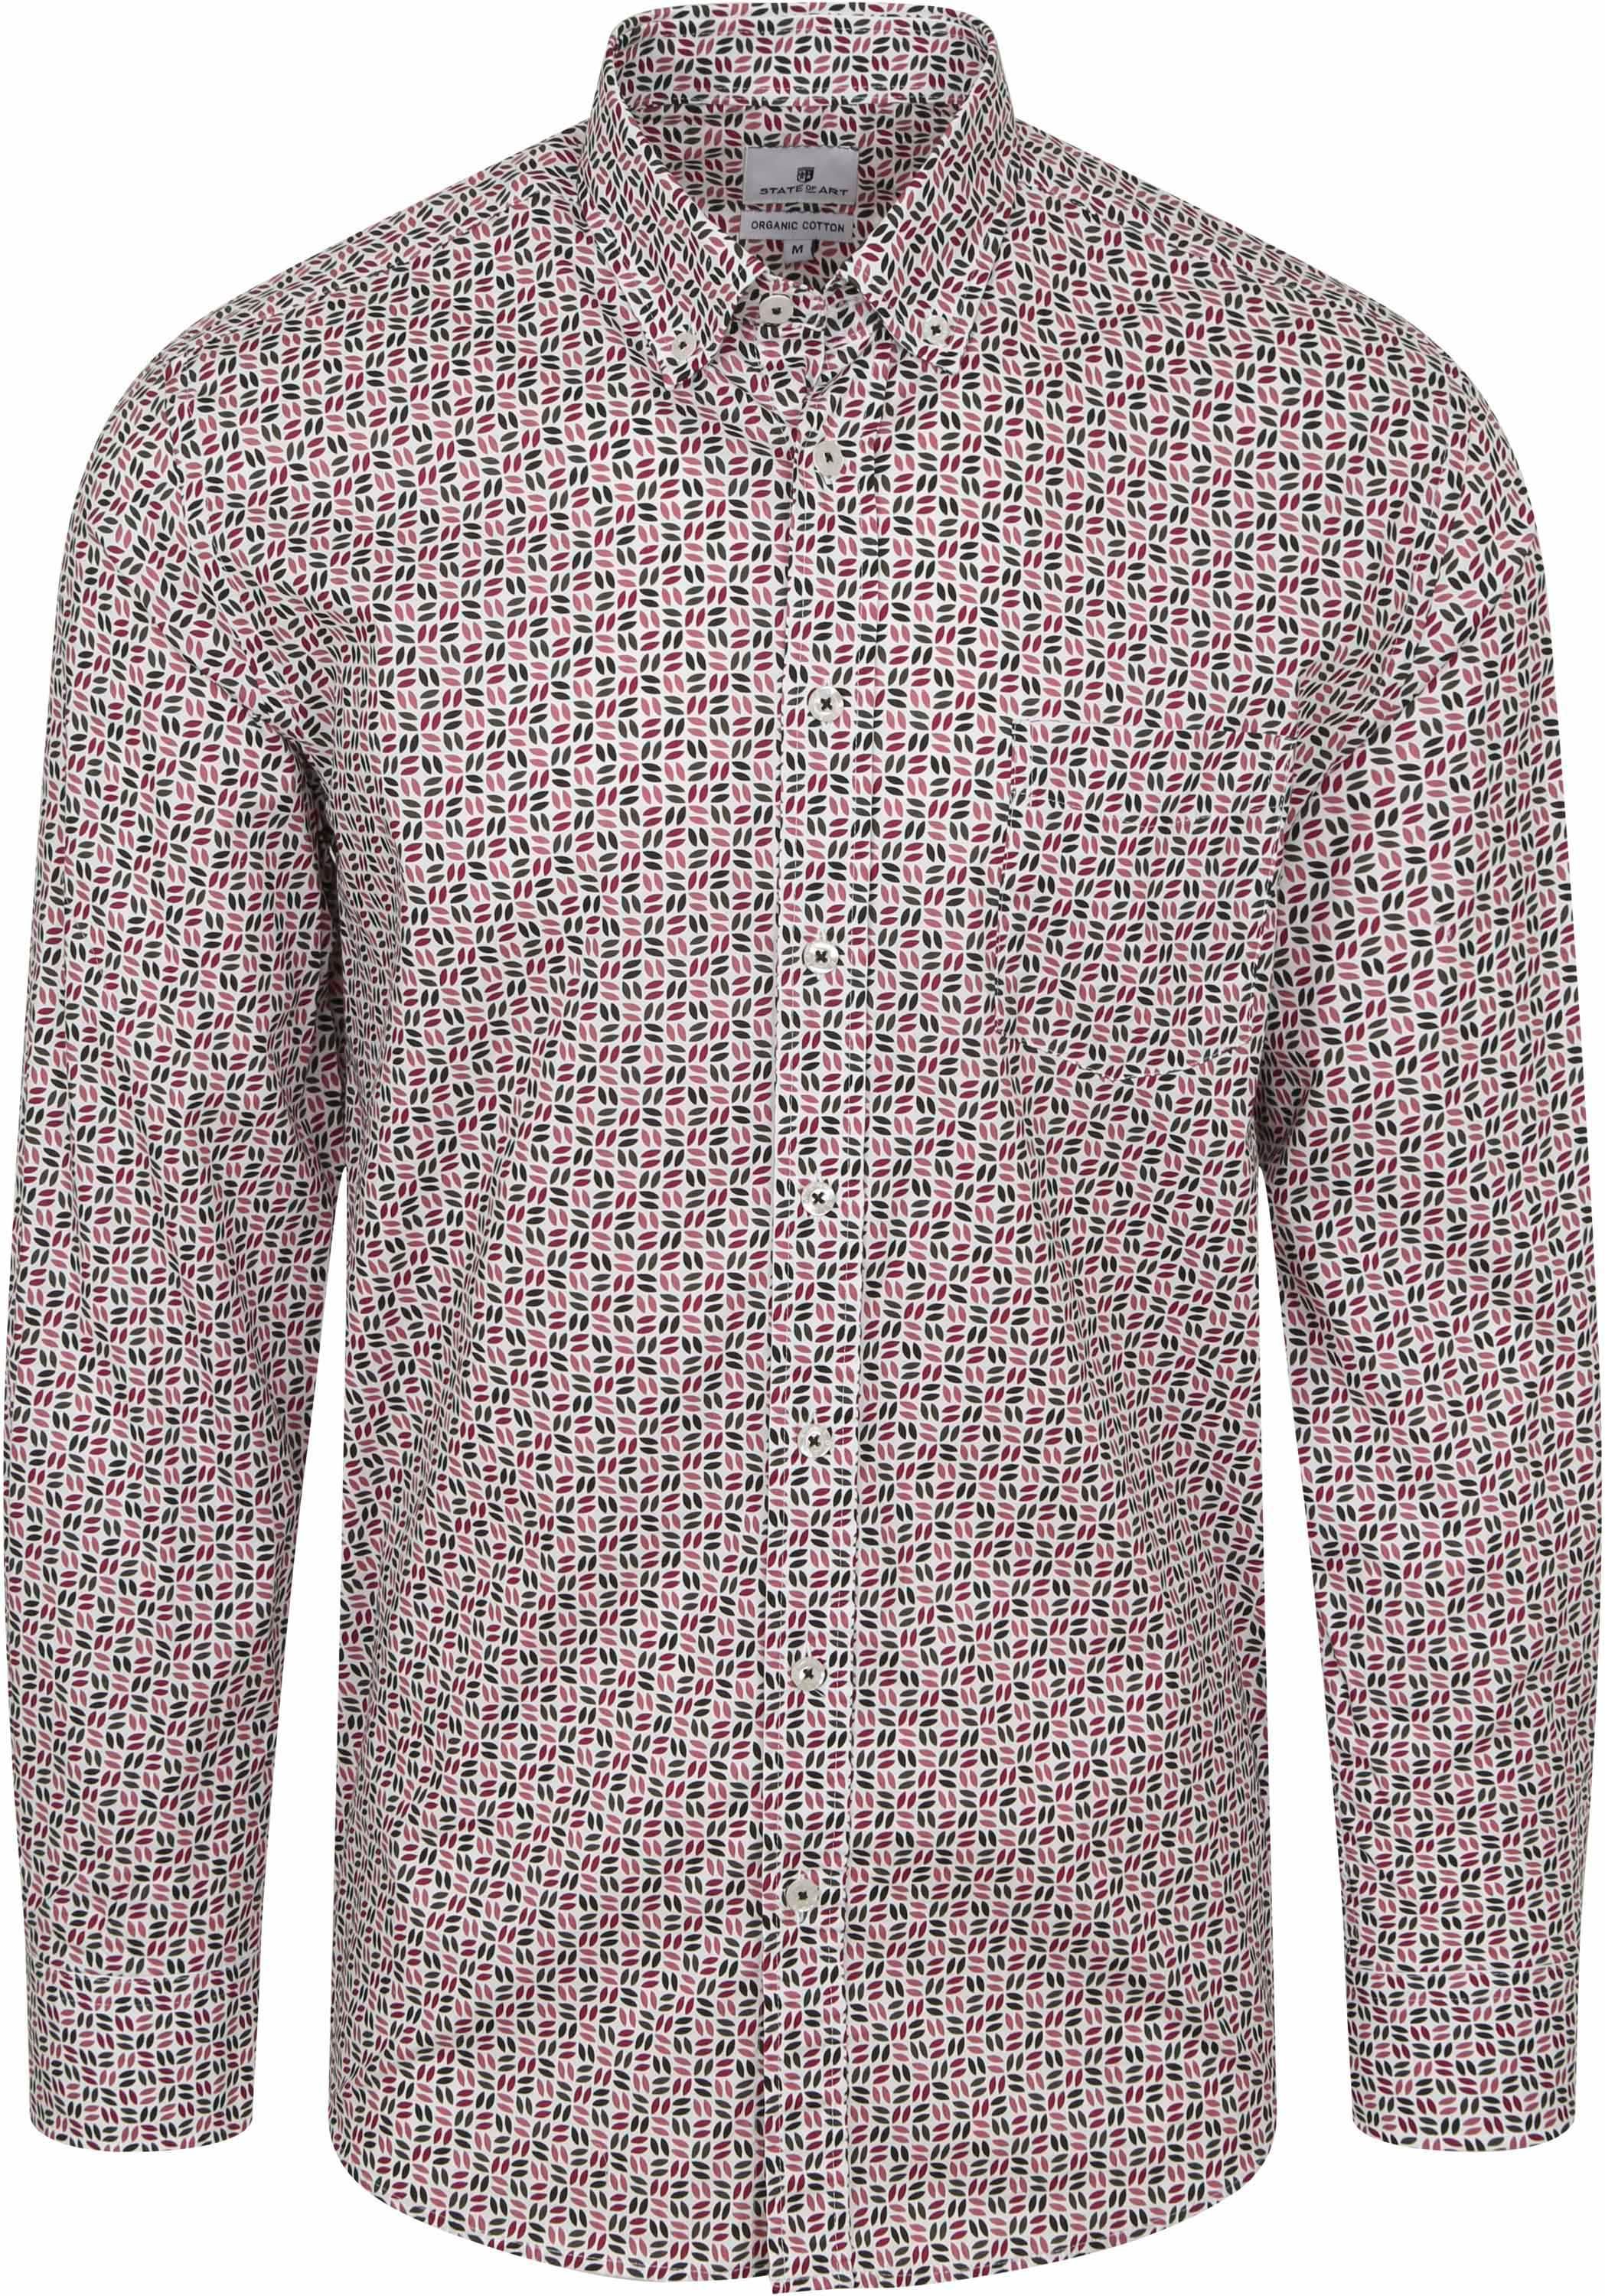 State Of Art Shirt Print Multicoloured Pink Multicolour size L